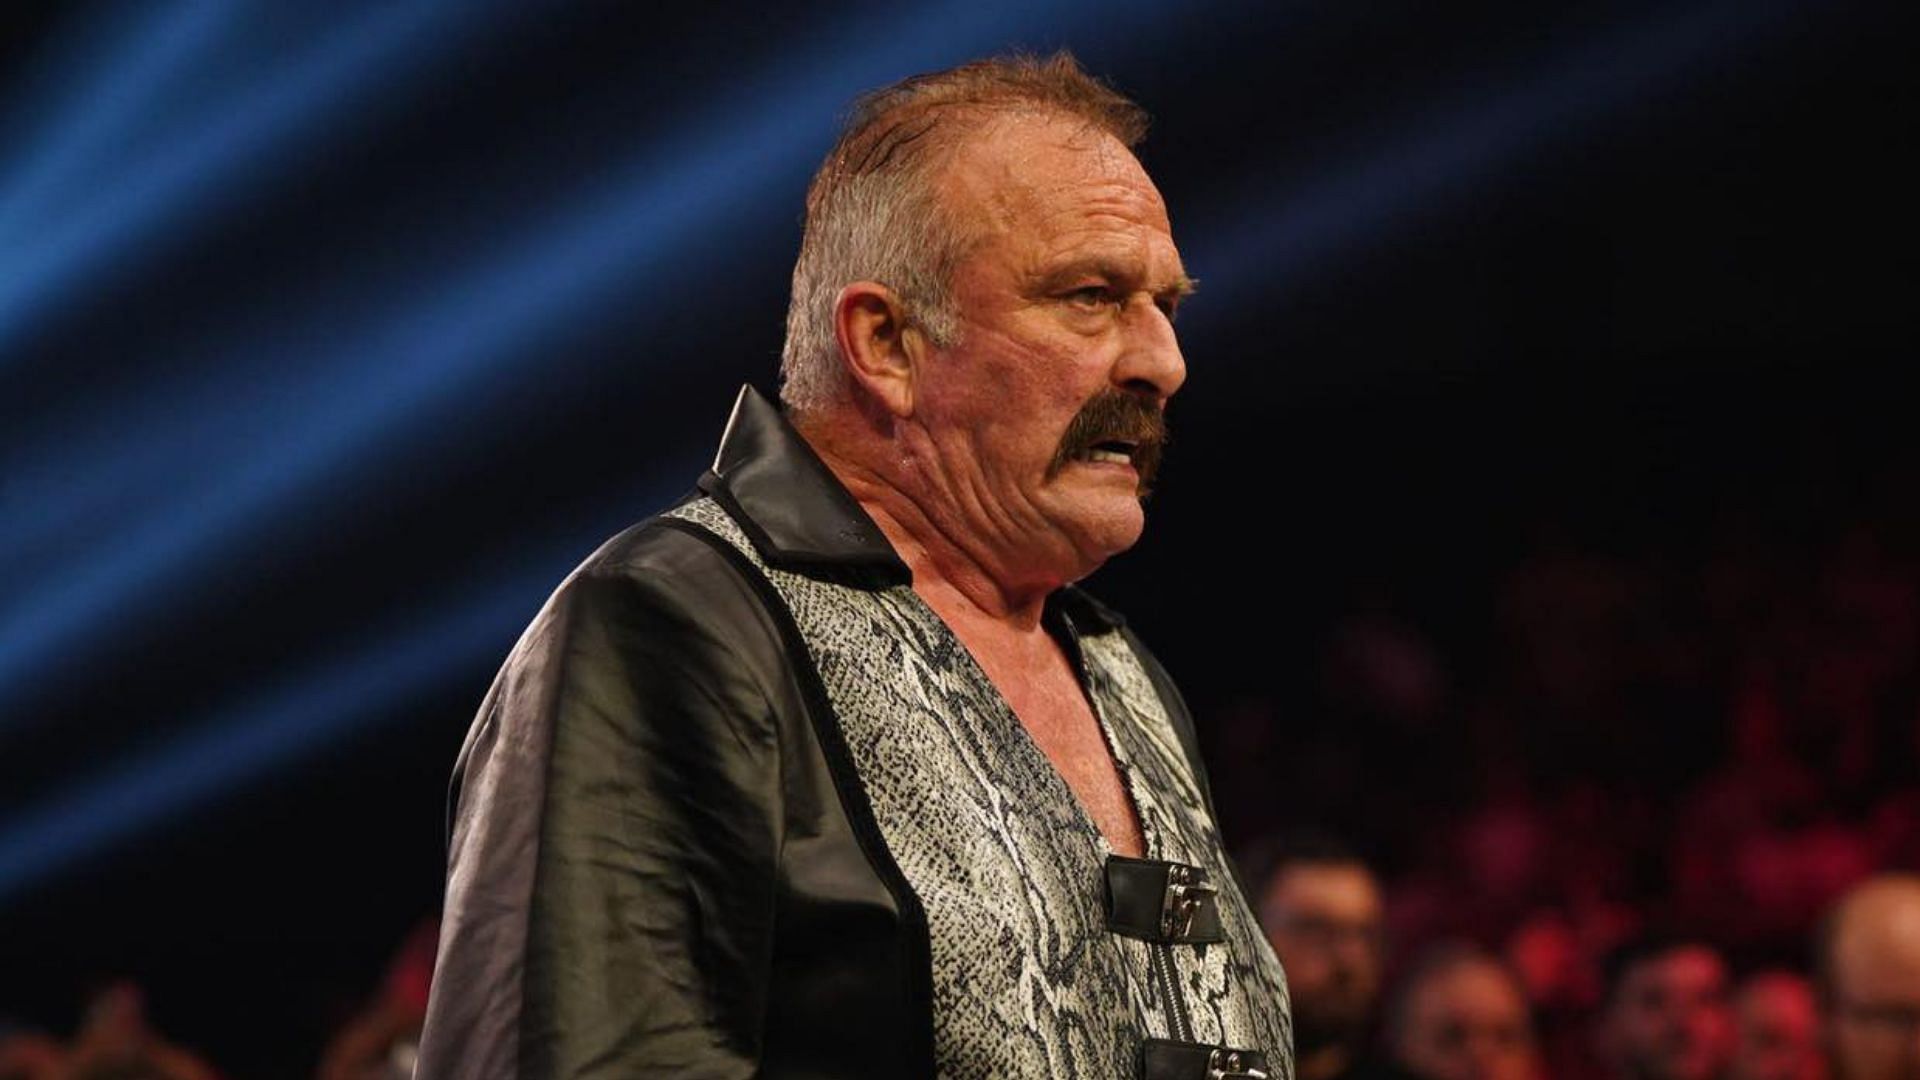 Jake Roberts thinks a top AEW star should maintain his composure